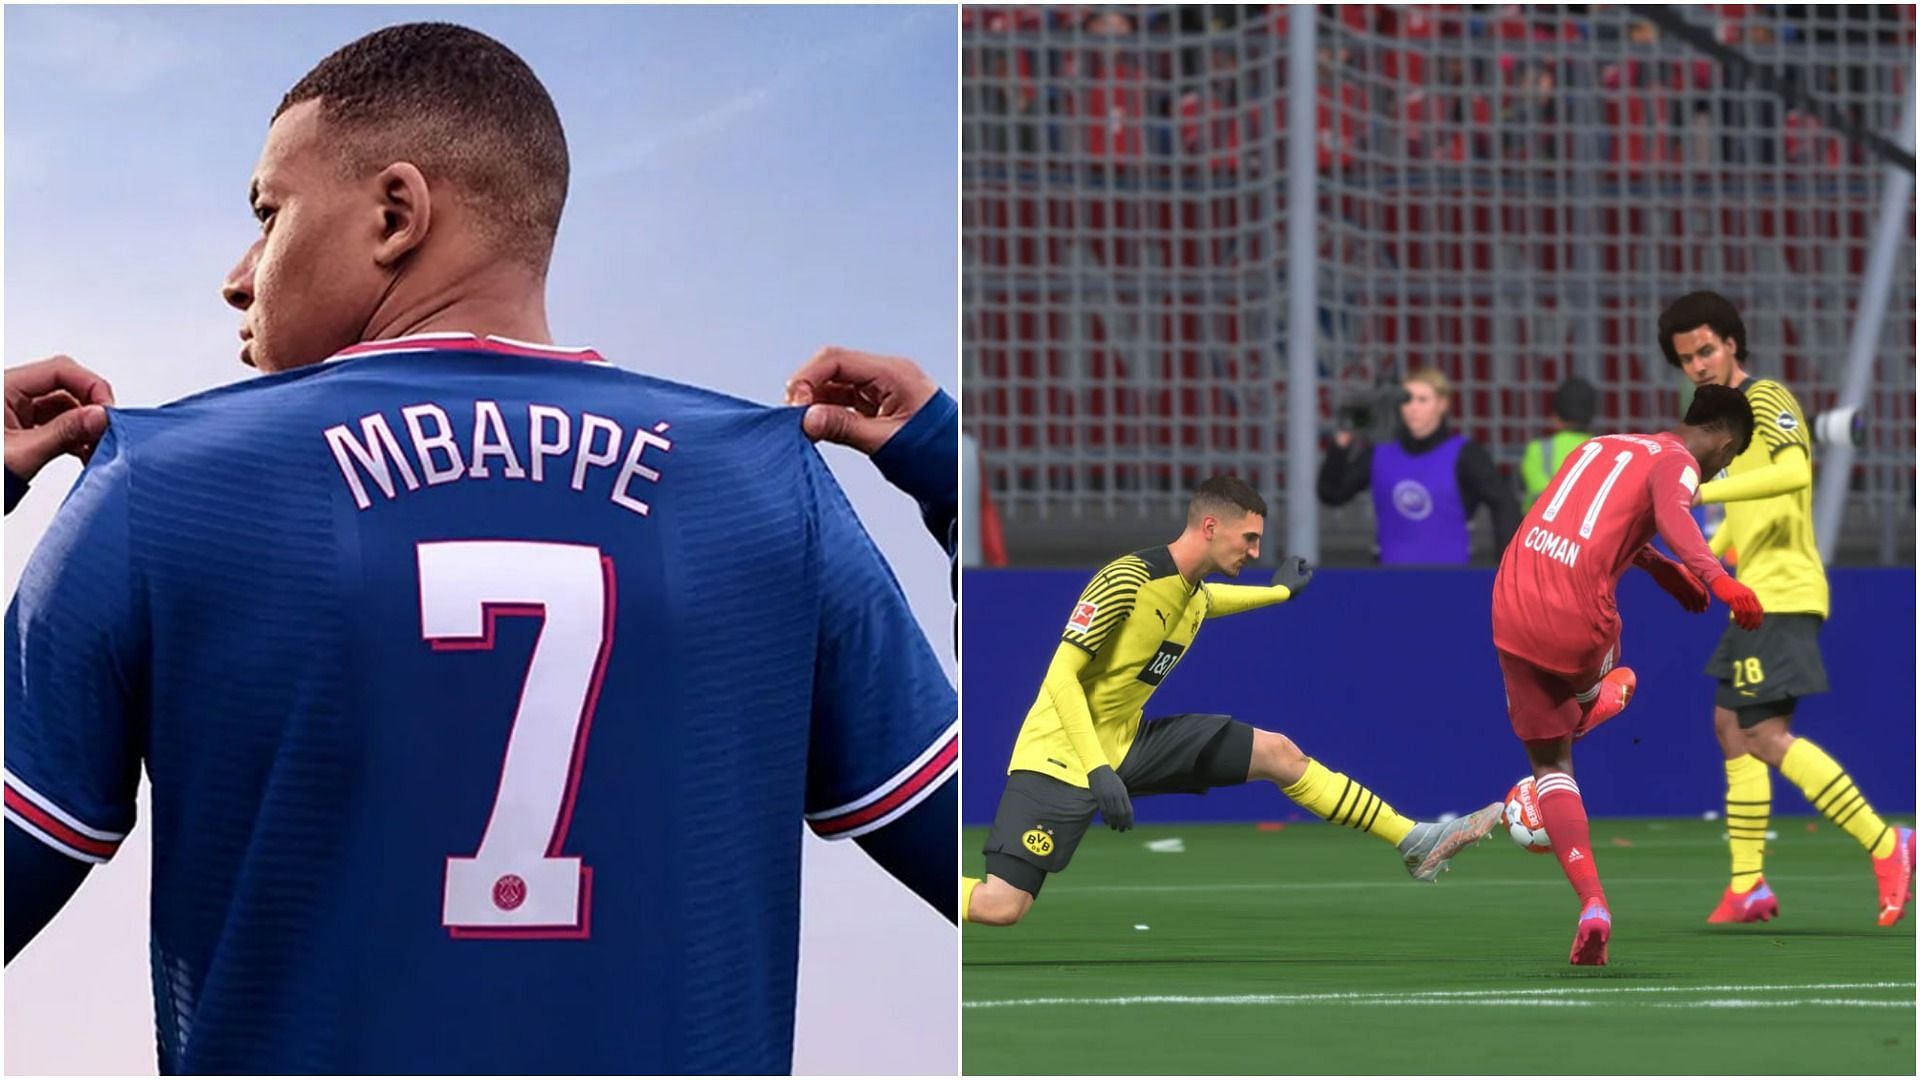 FIFA 22 players are unhappy with the basketball-like gameplay (Images via EA Sports, FIFA 22)